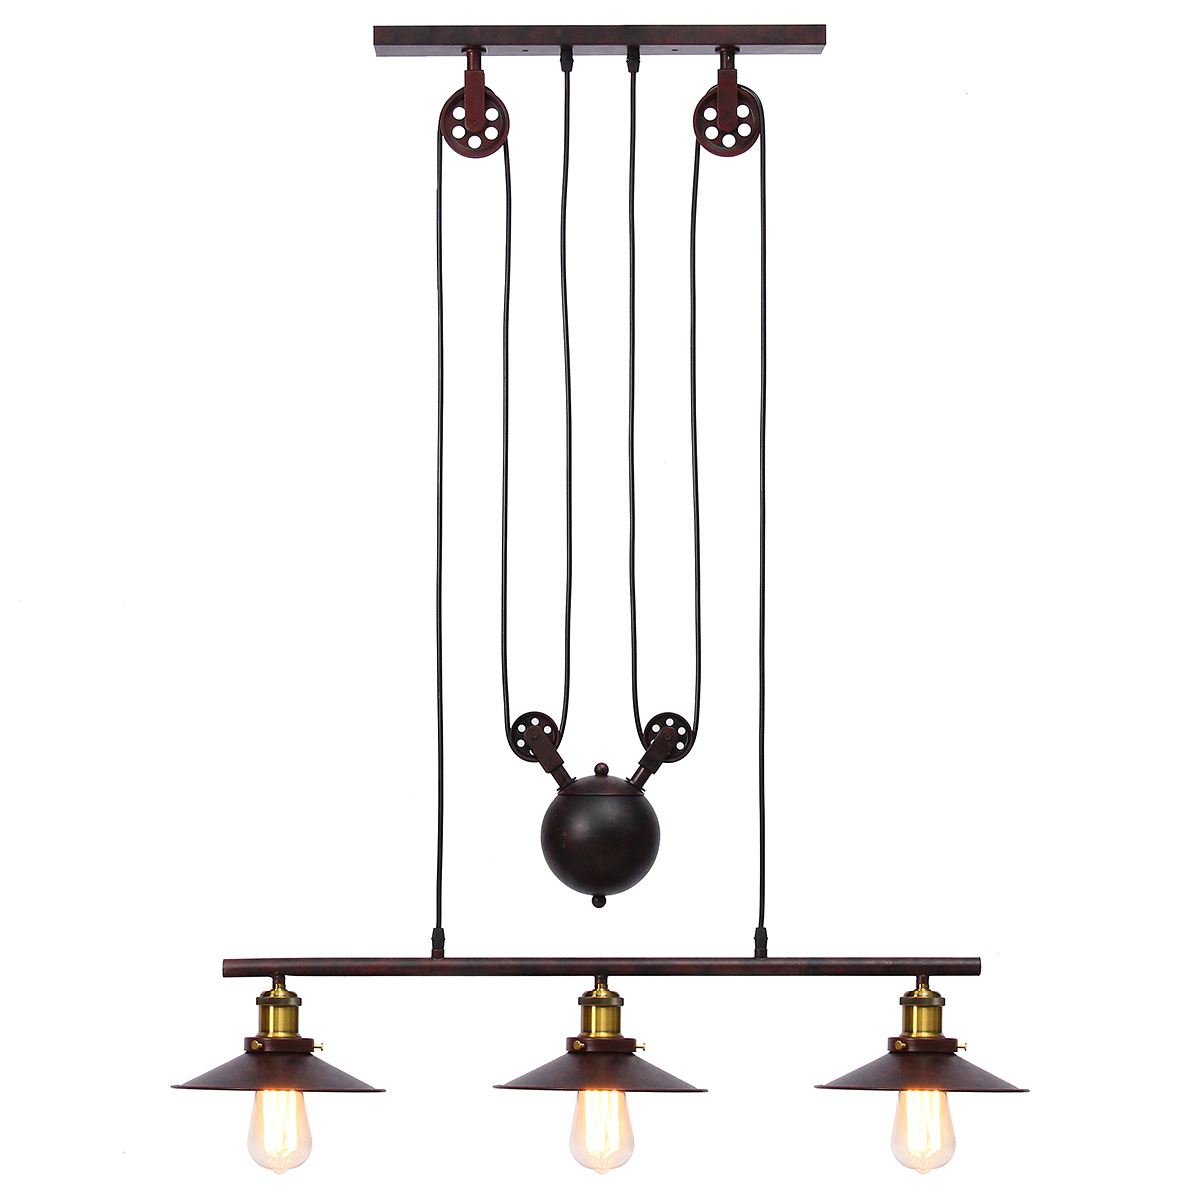 

Industrial Vintage Hanging Retractable Pulley Pendant Light Ceiling Light Holder Chandeliers Lamp Fixture fit for E27 Bulb AC100-240V Rust / Black